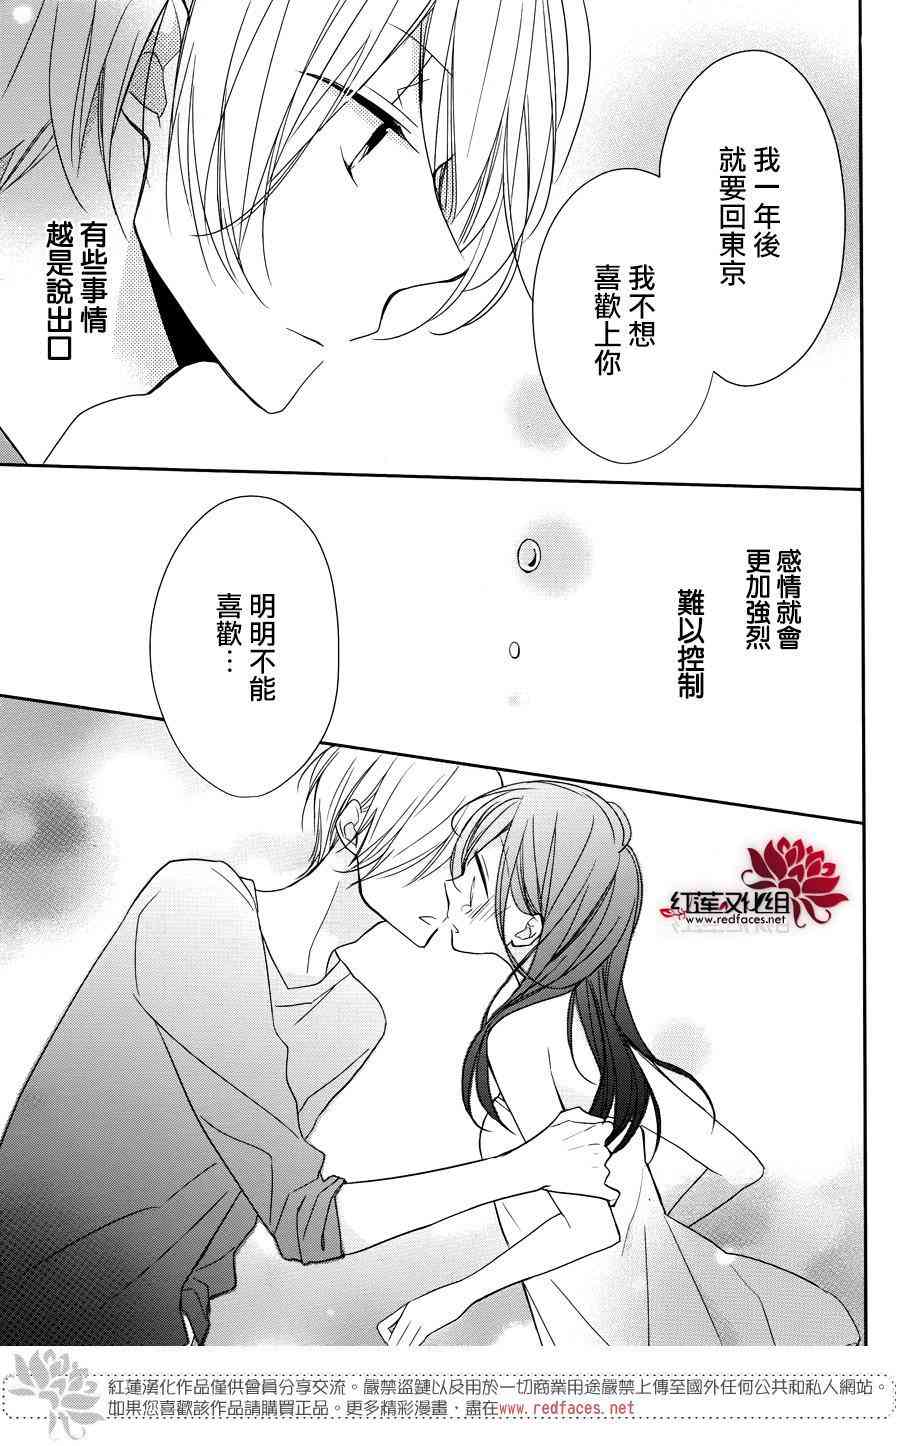 If given a second chance - 4話 - 7